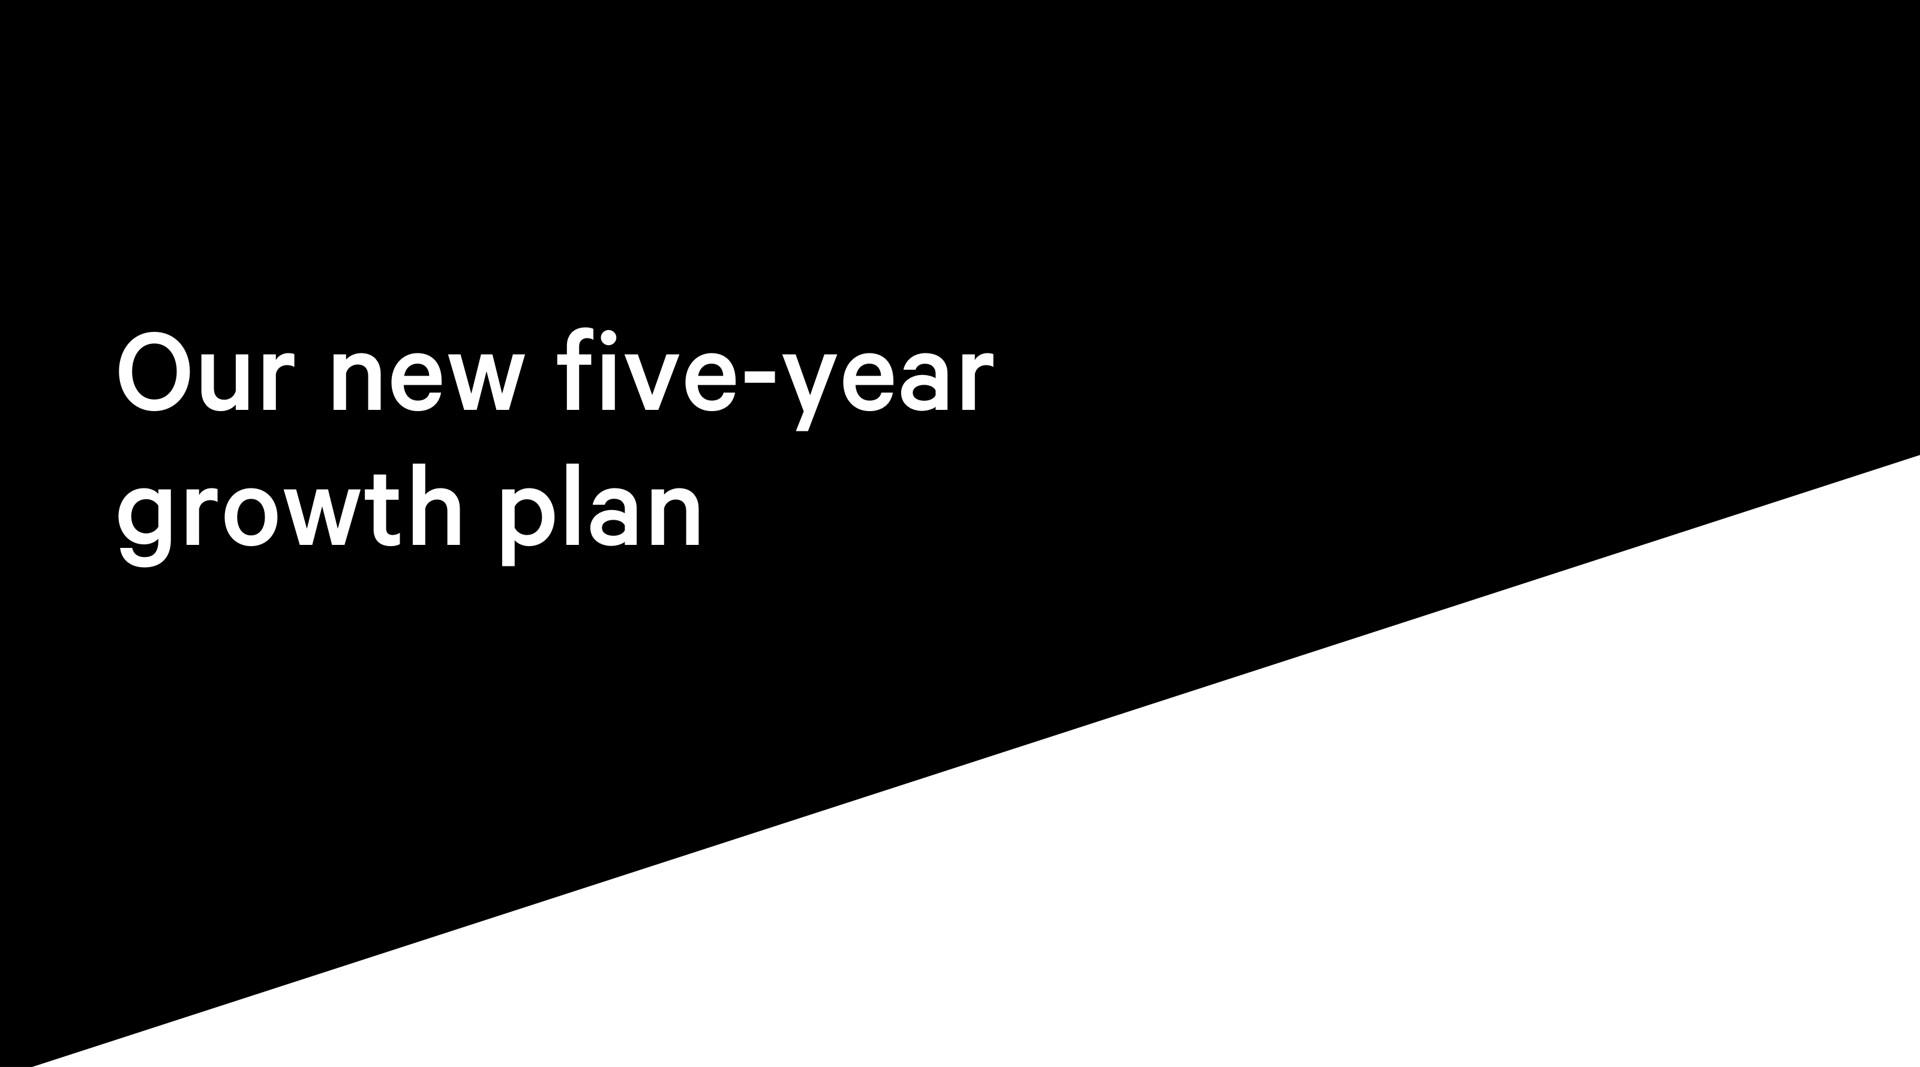 our new five year growth plan we intend to double our business in the next five years | Lululemon